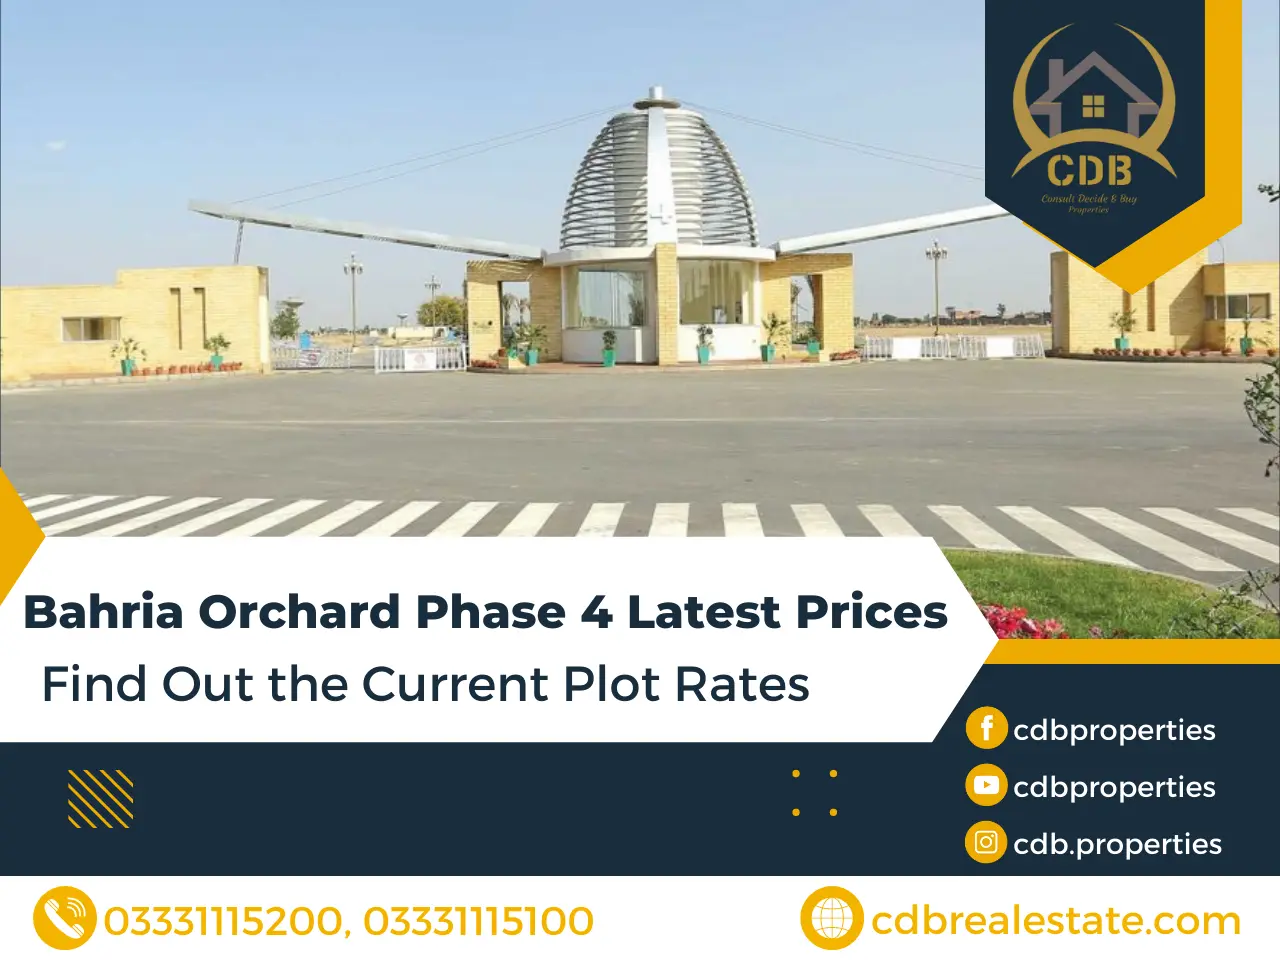 Bahria Orchard Phase 4 Latest Prices - CDB Properties